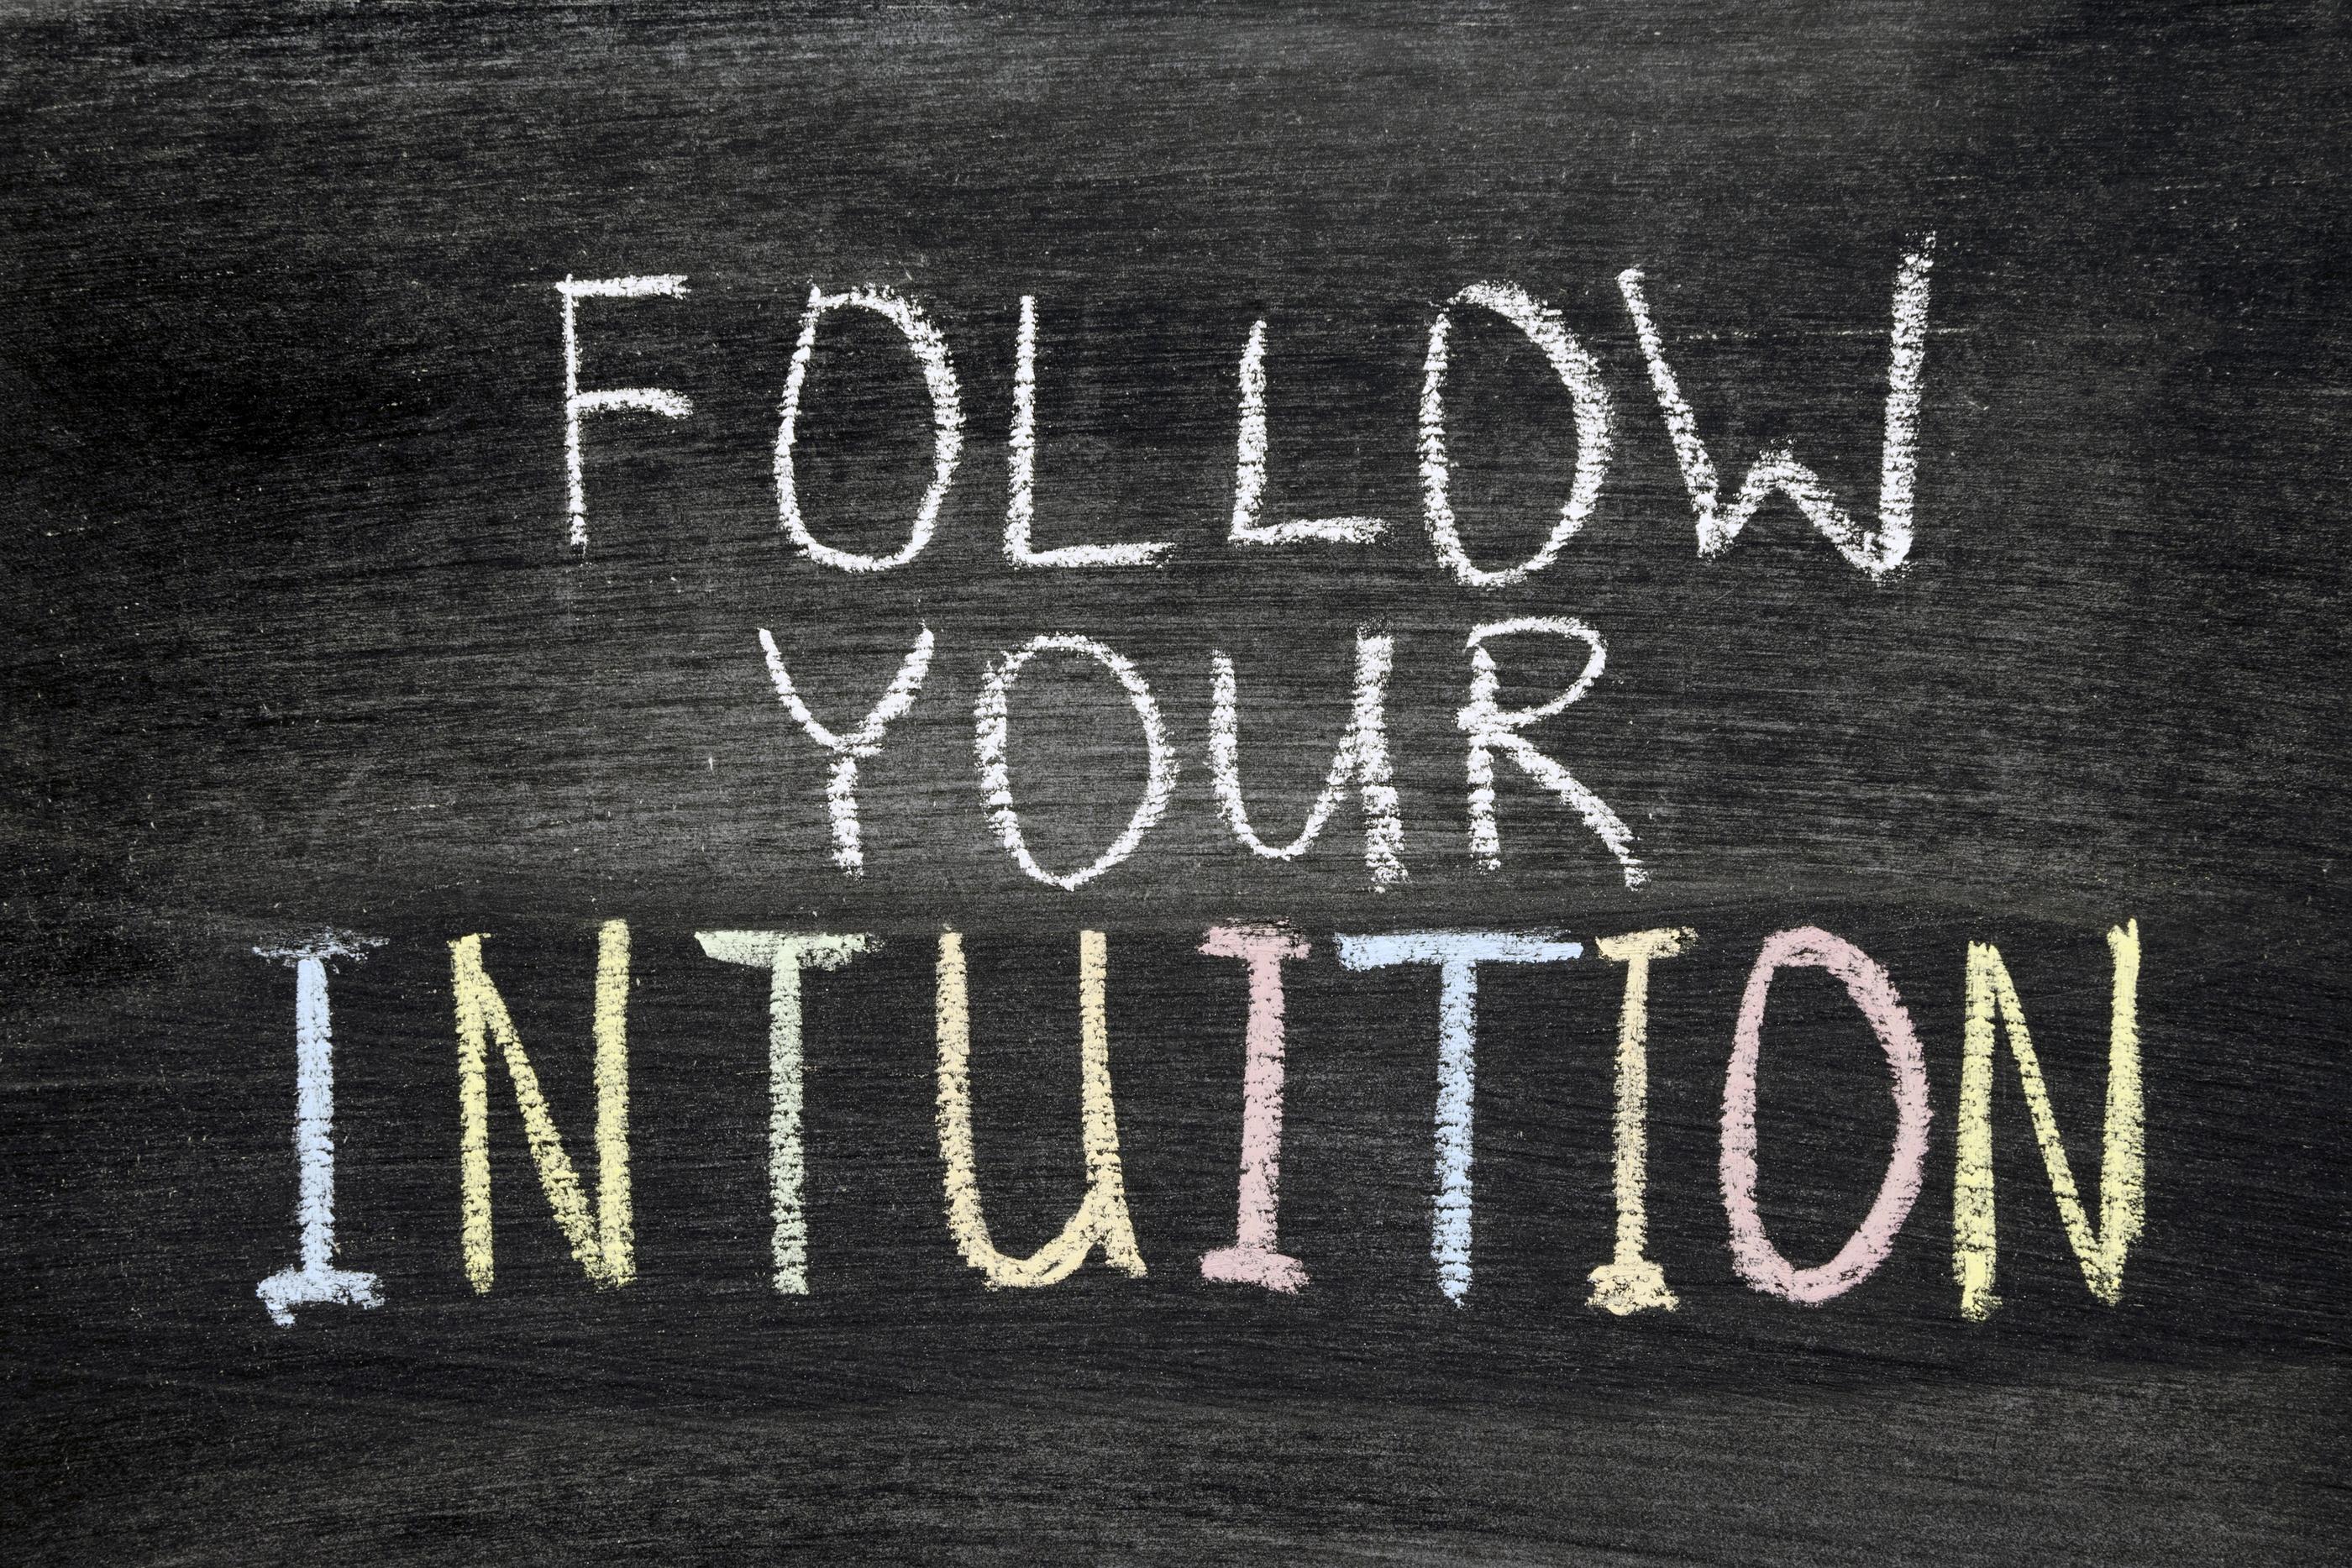 Let's Practice! Contacting Spirit & Developing your intuition